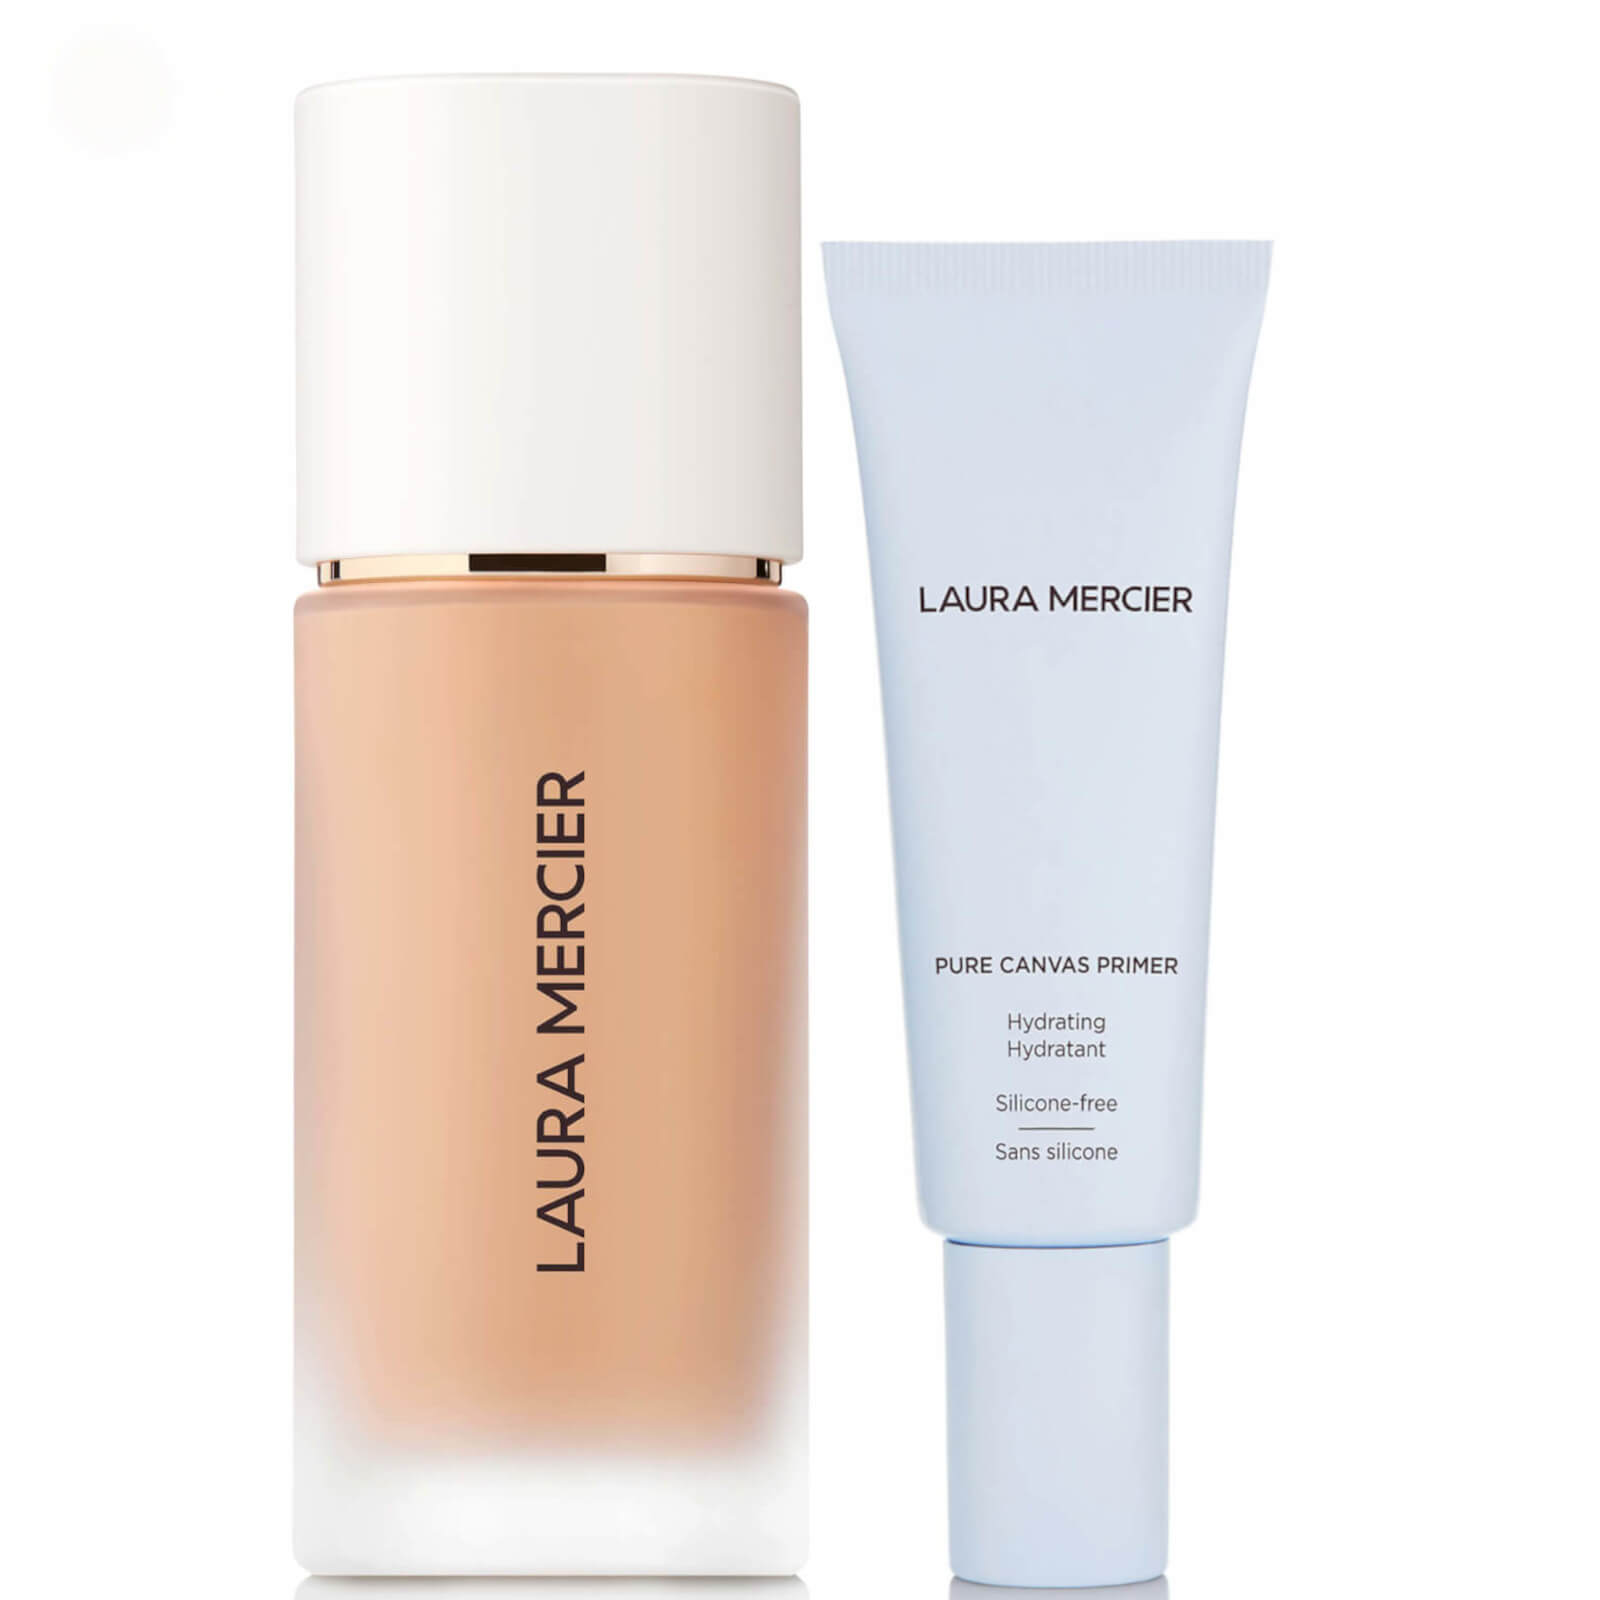 Laura Mercier Real Flawless Foundation and Pure Canvas Hydrating Primer Bundle (Various Shades) - 3W